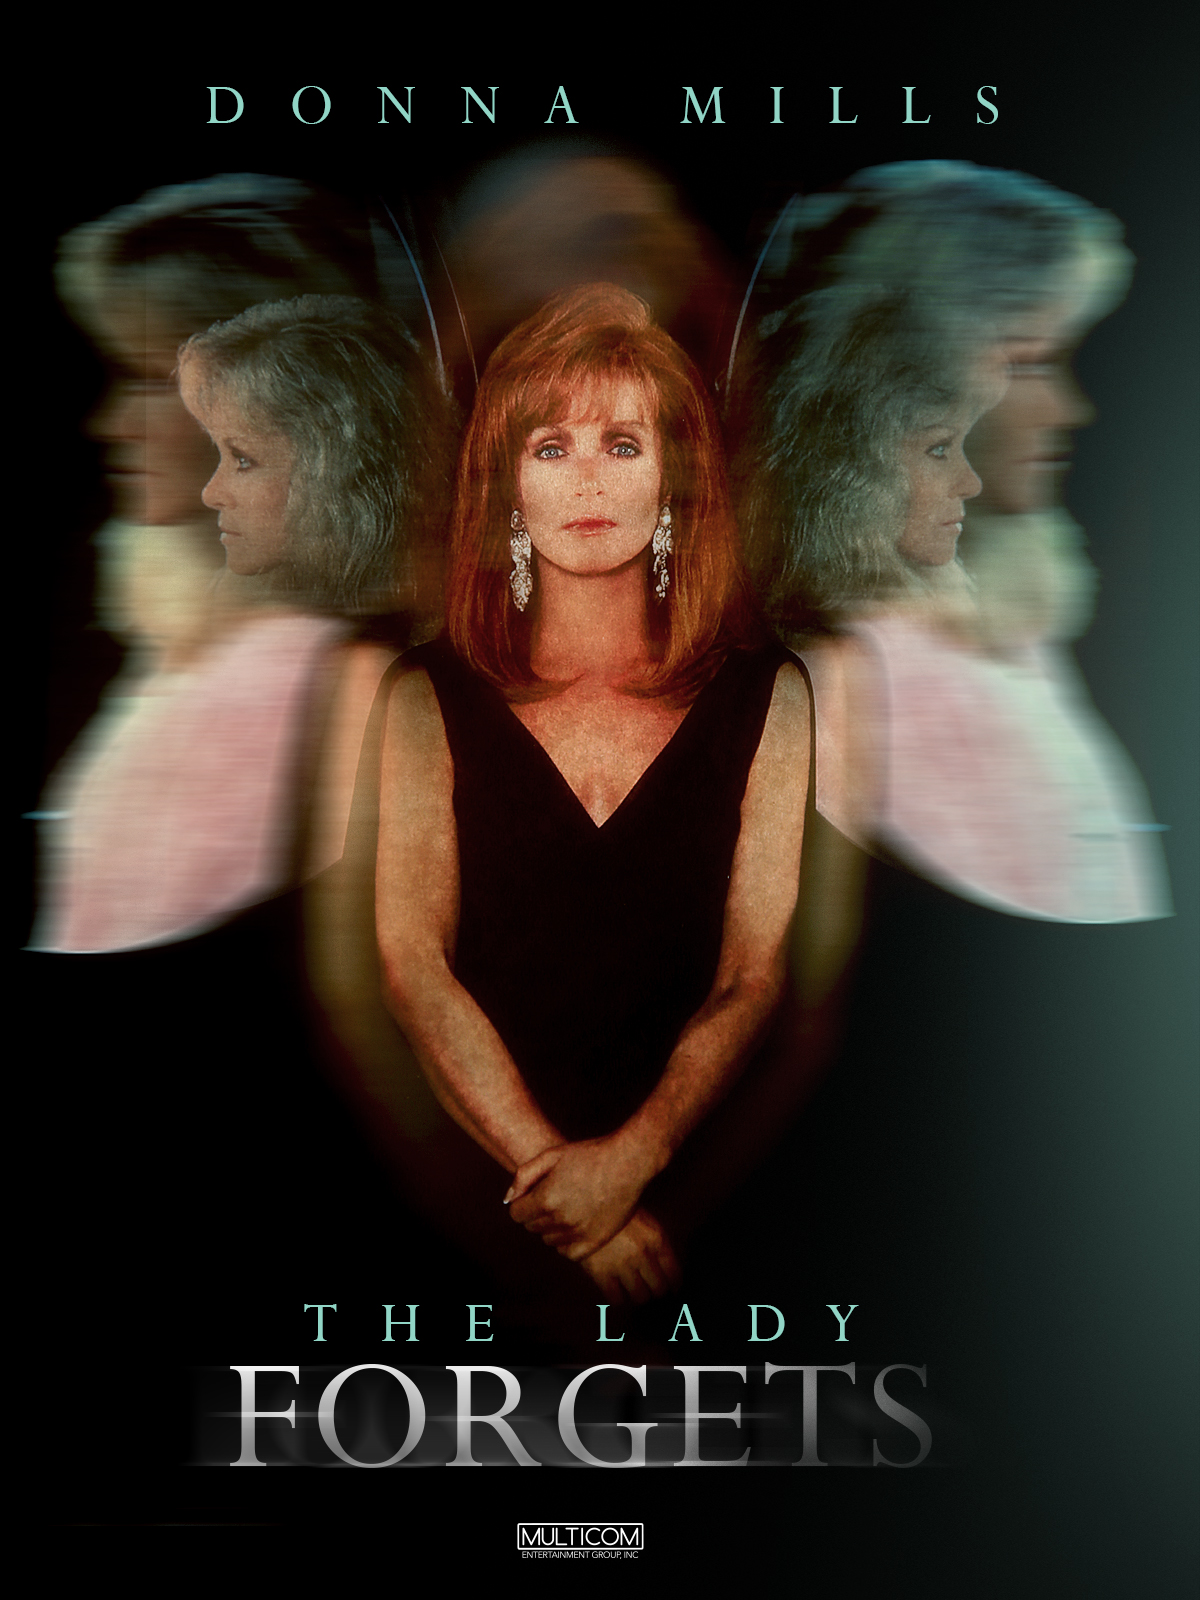 The Lady Forgets (1989) starring Donna Mills on DVD on DVD